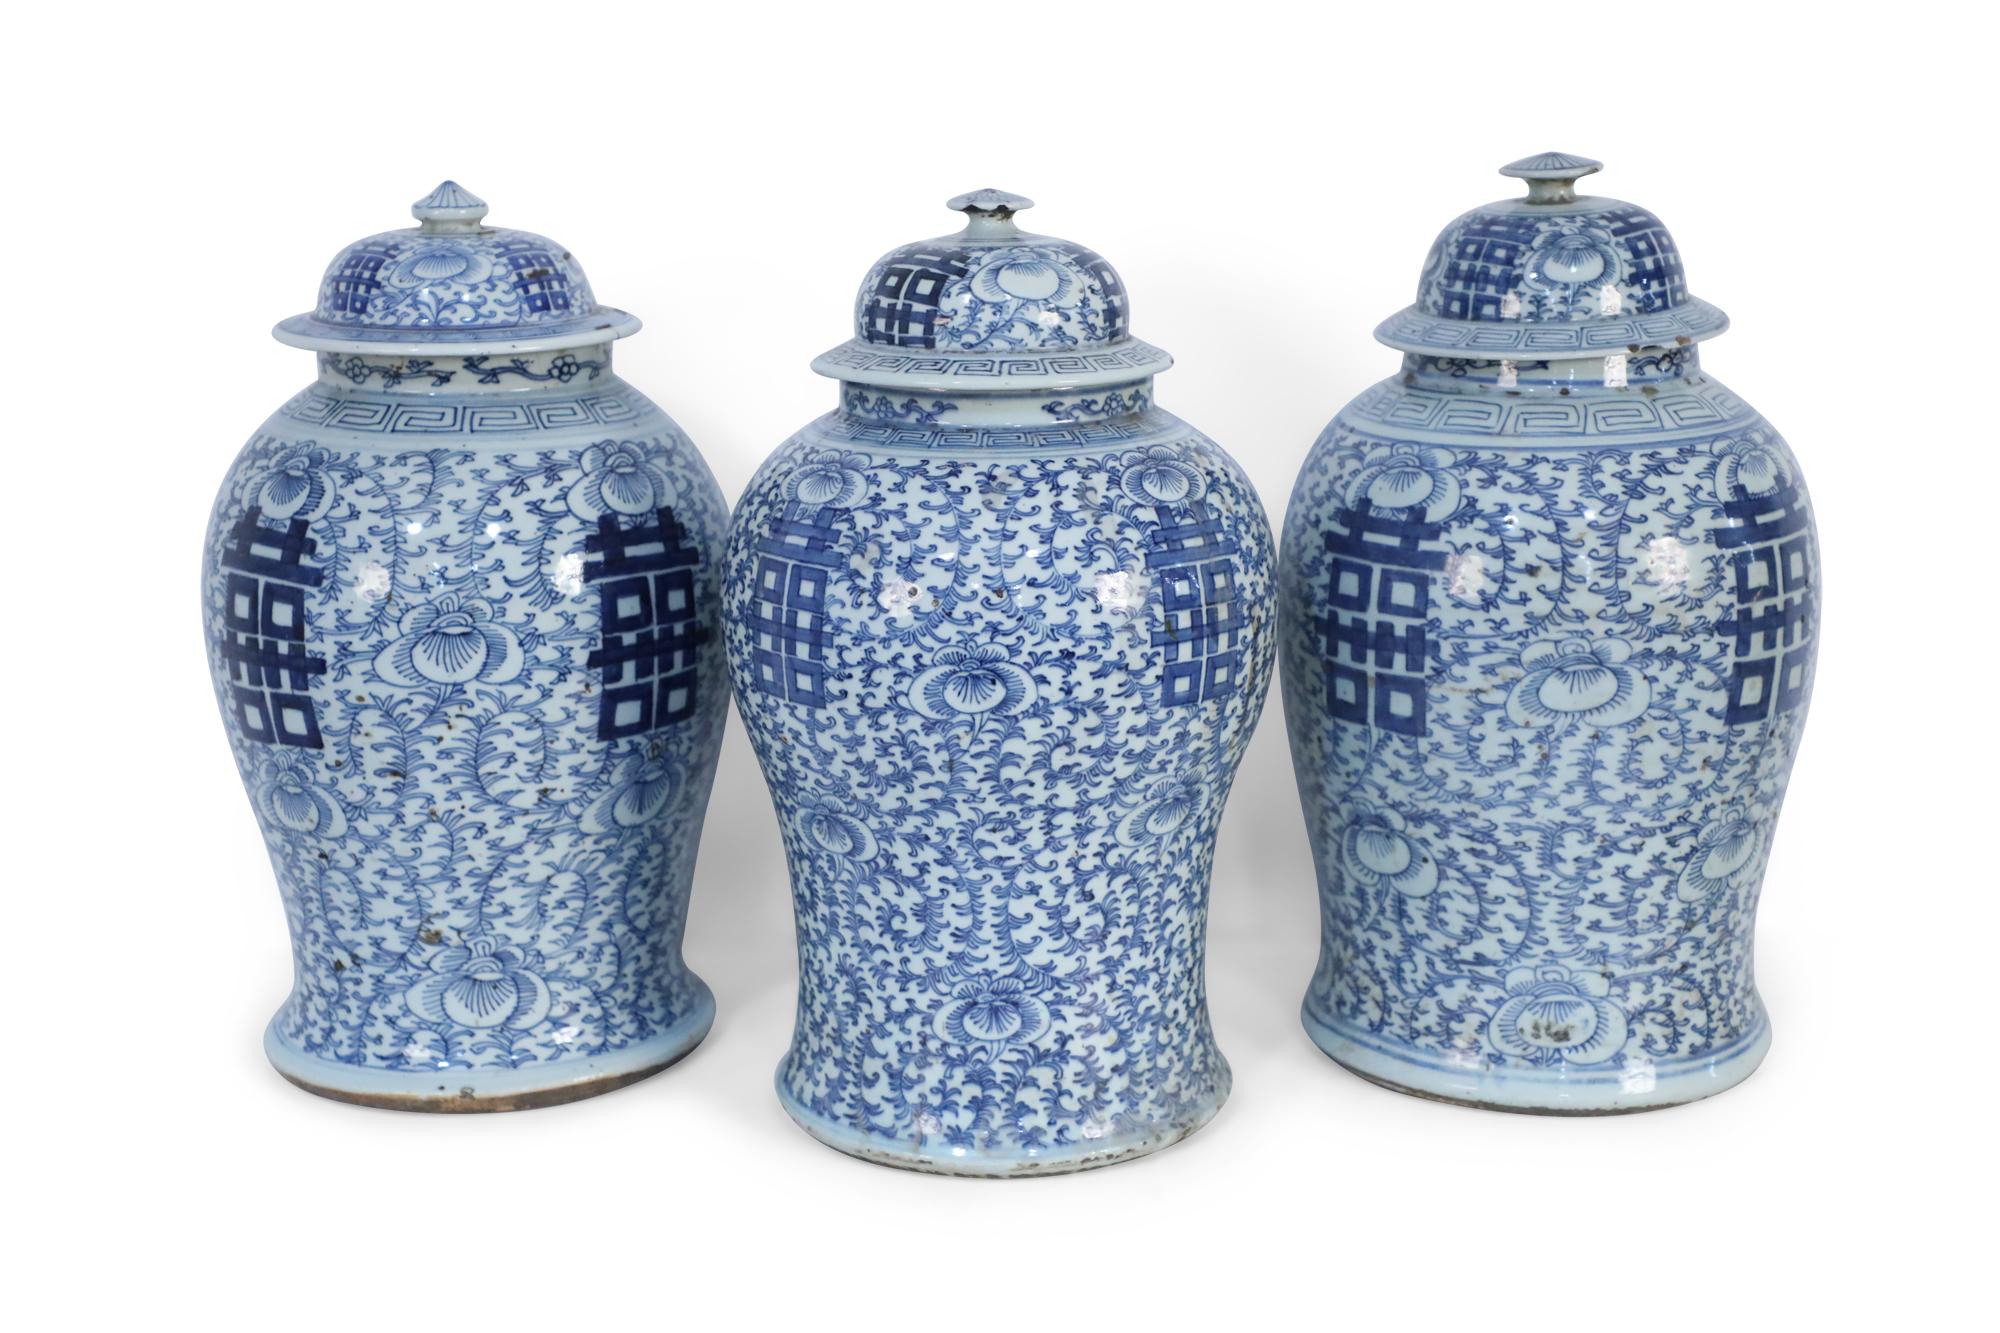 3 antique Chinese (late 19th century) similar lidded ceramic urns with blue floral designs surrounding bold, centered characters on 4 sides (jars vary slightly in size, pattern, and color) (priced each).
     